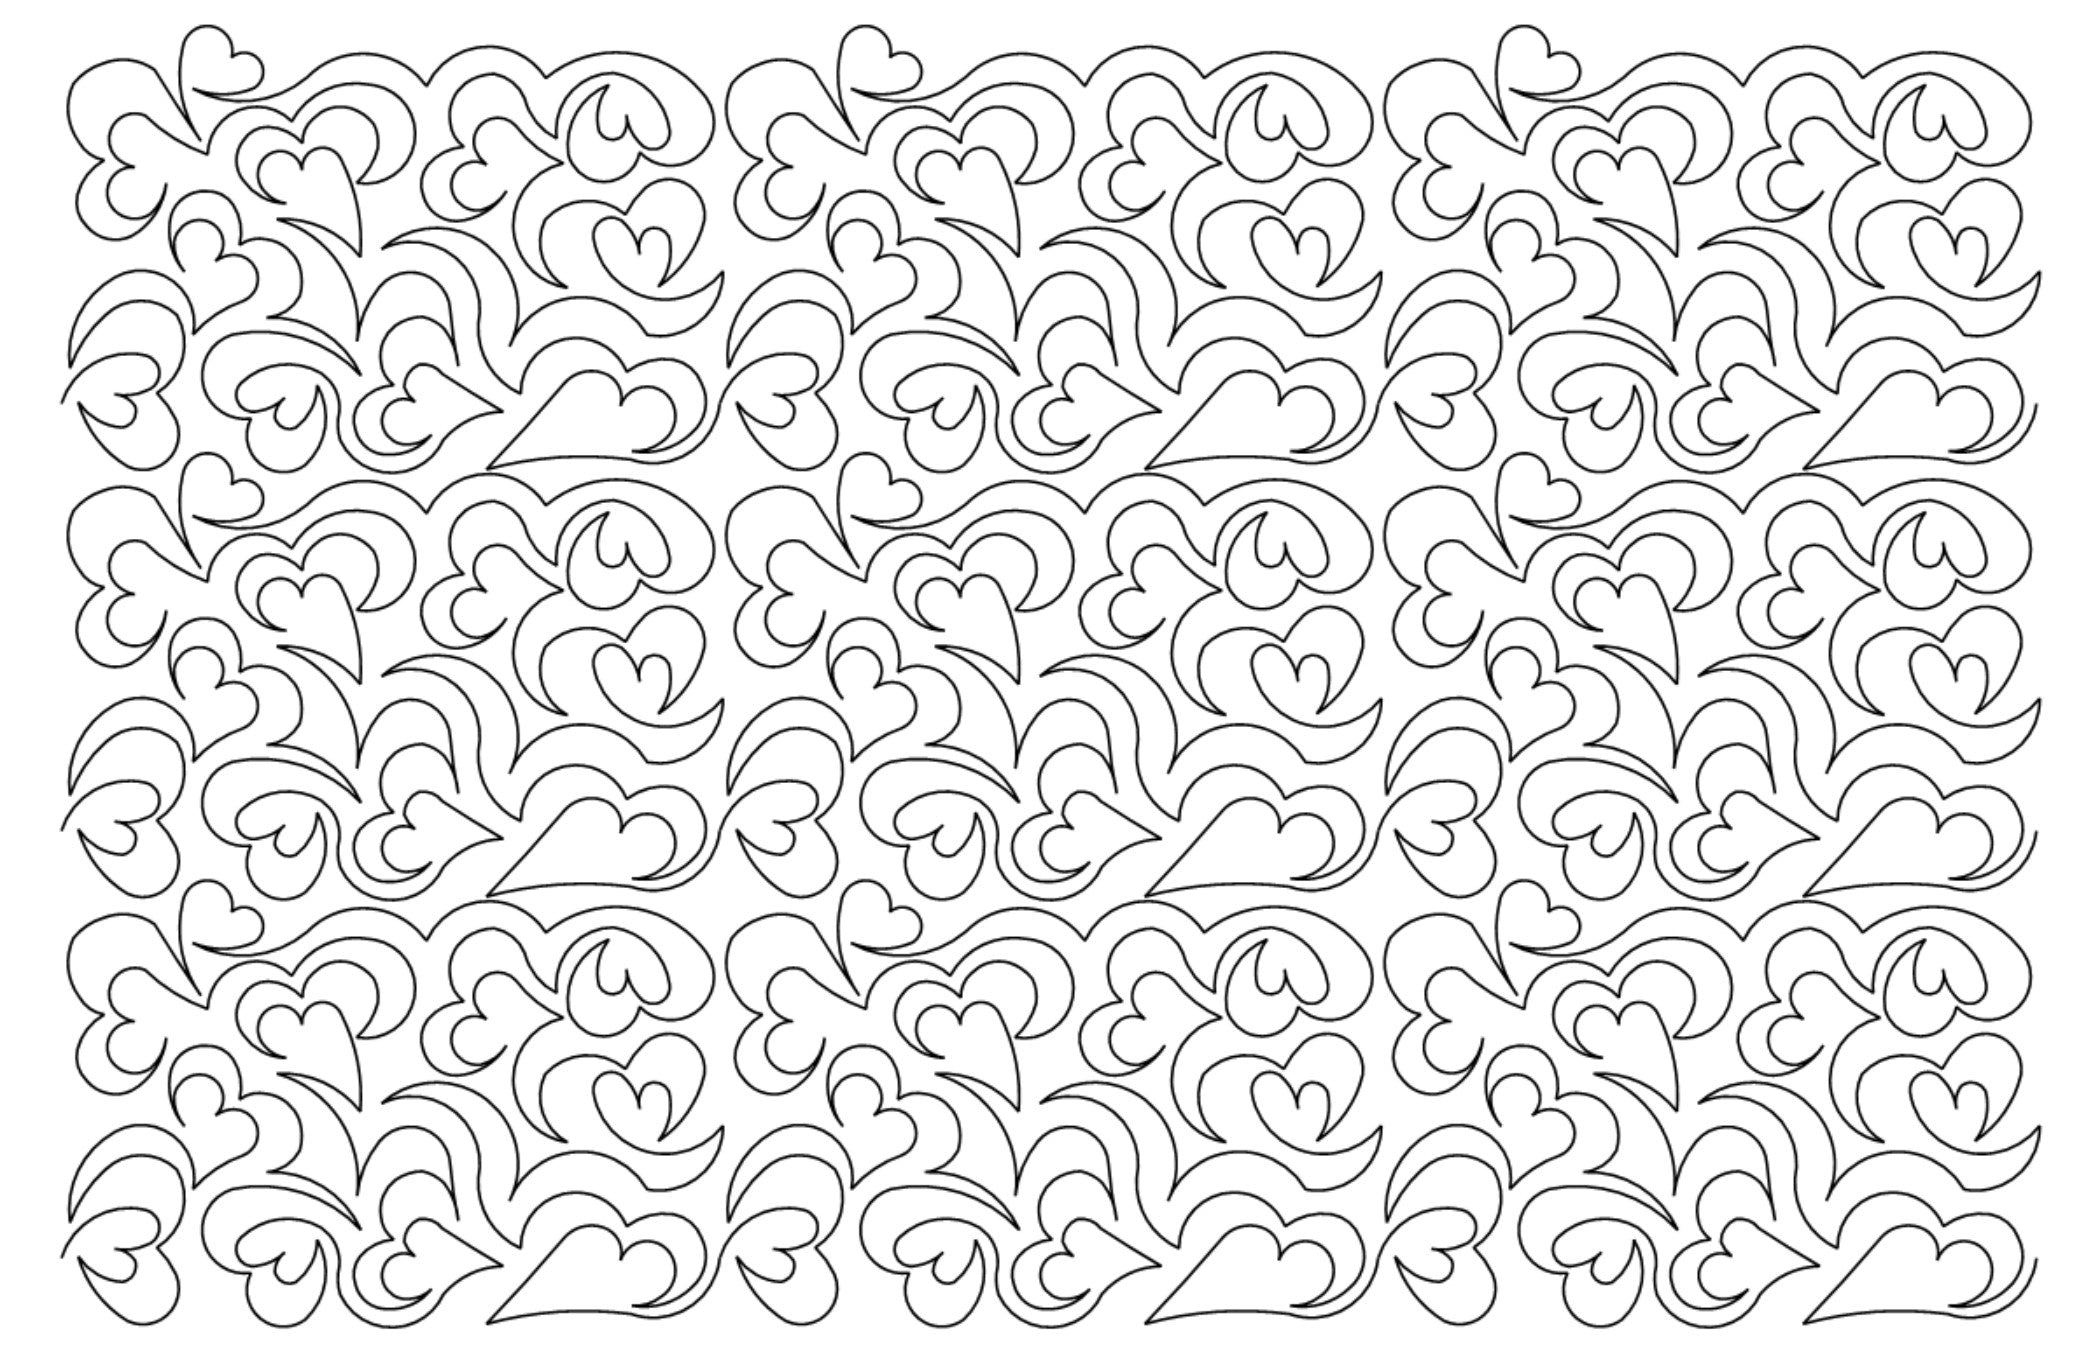 Heart Feathers Digital E2E Wildflower Quilting Pantograph